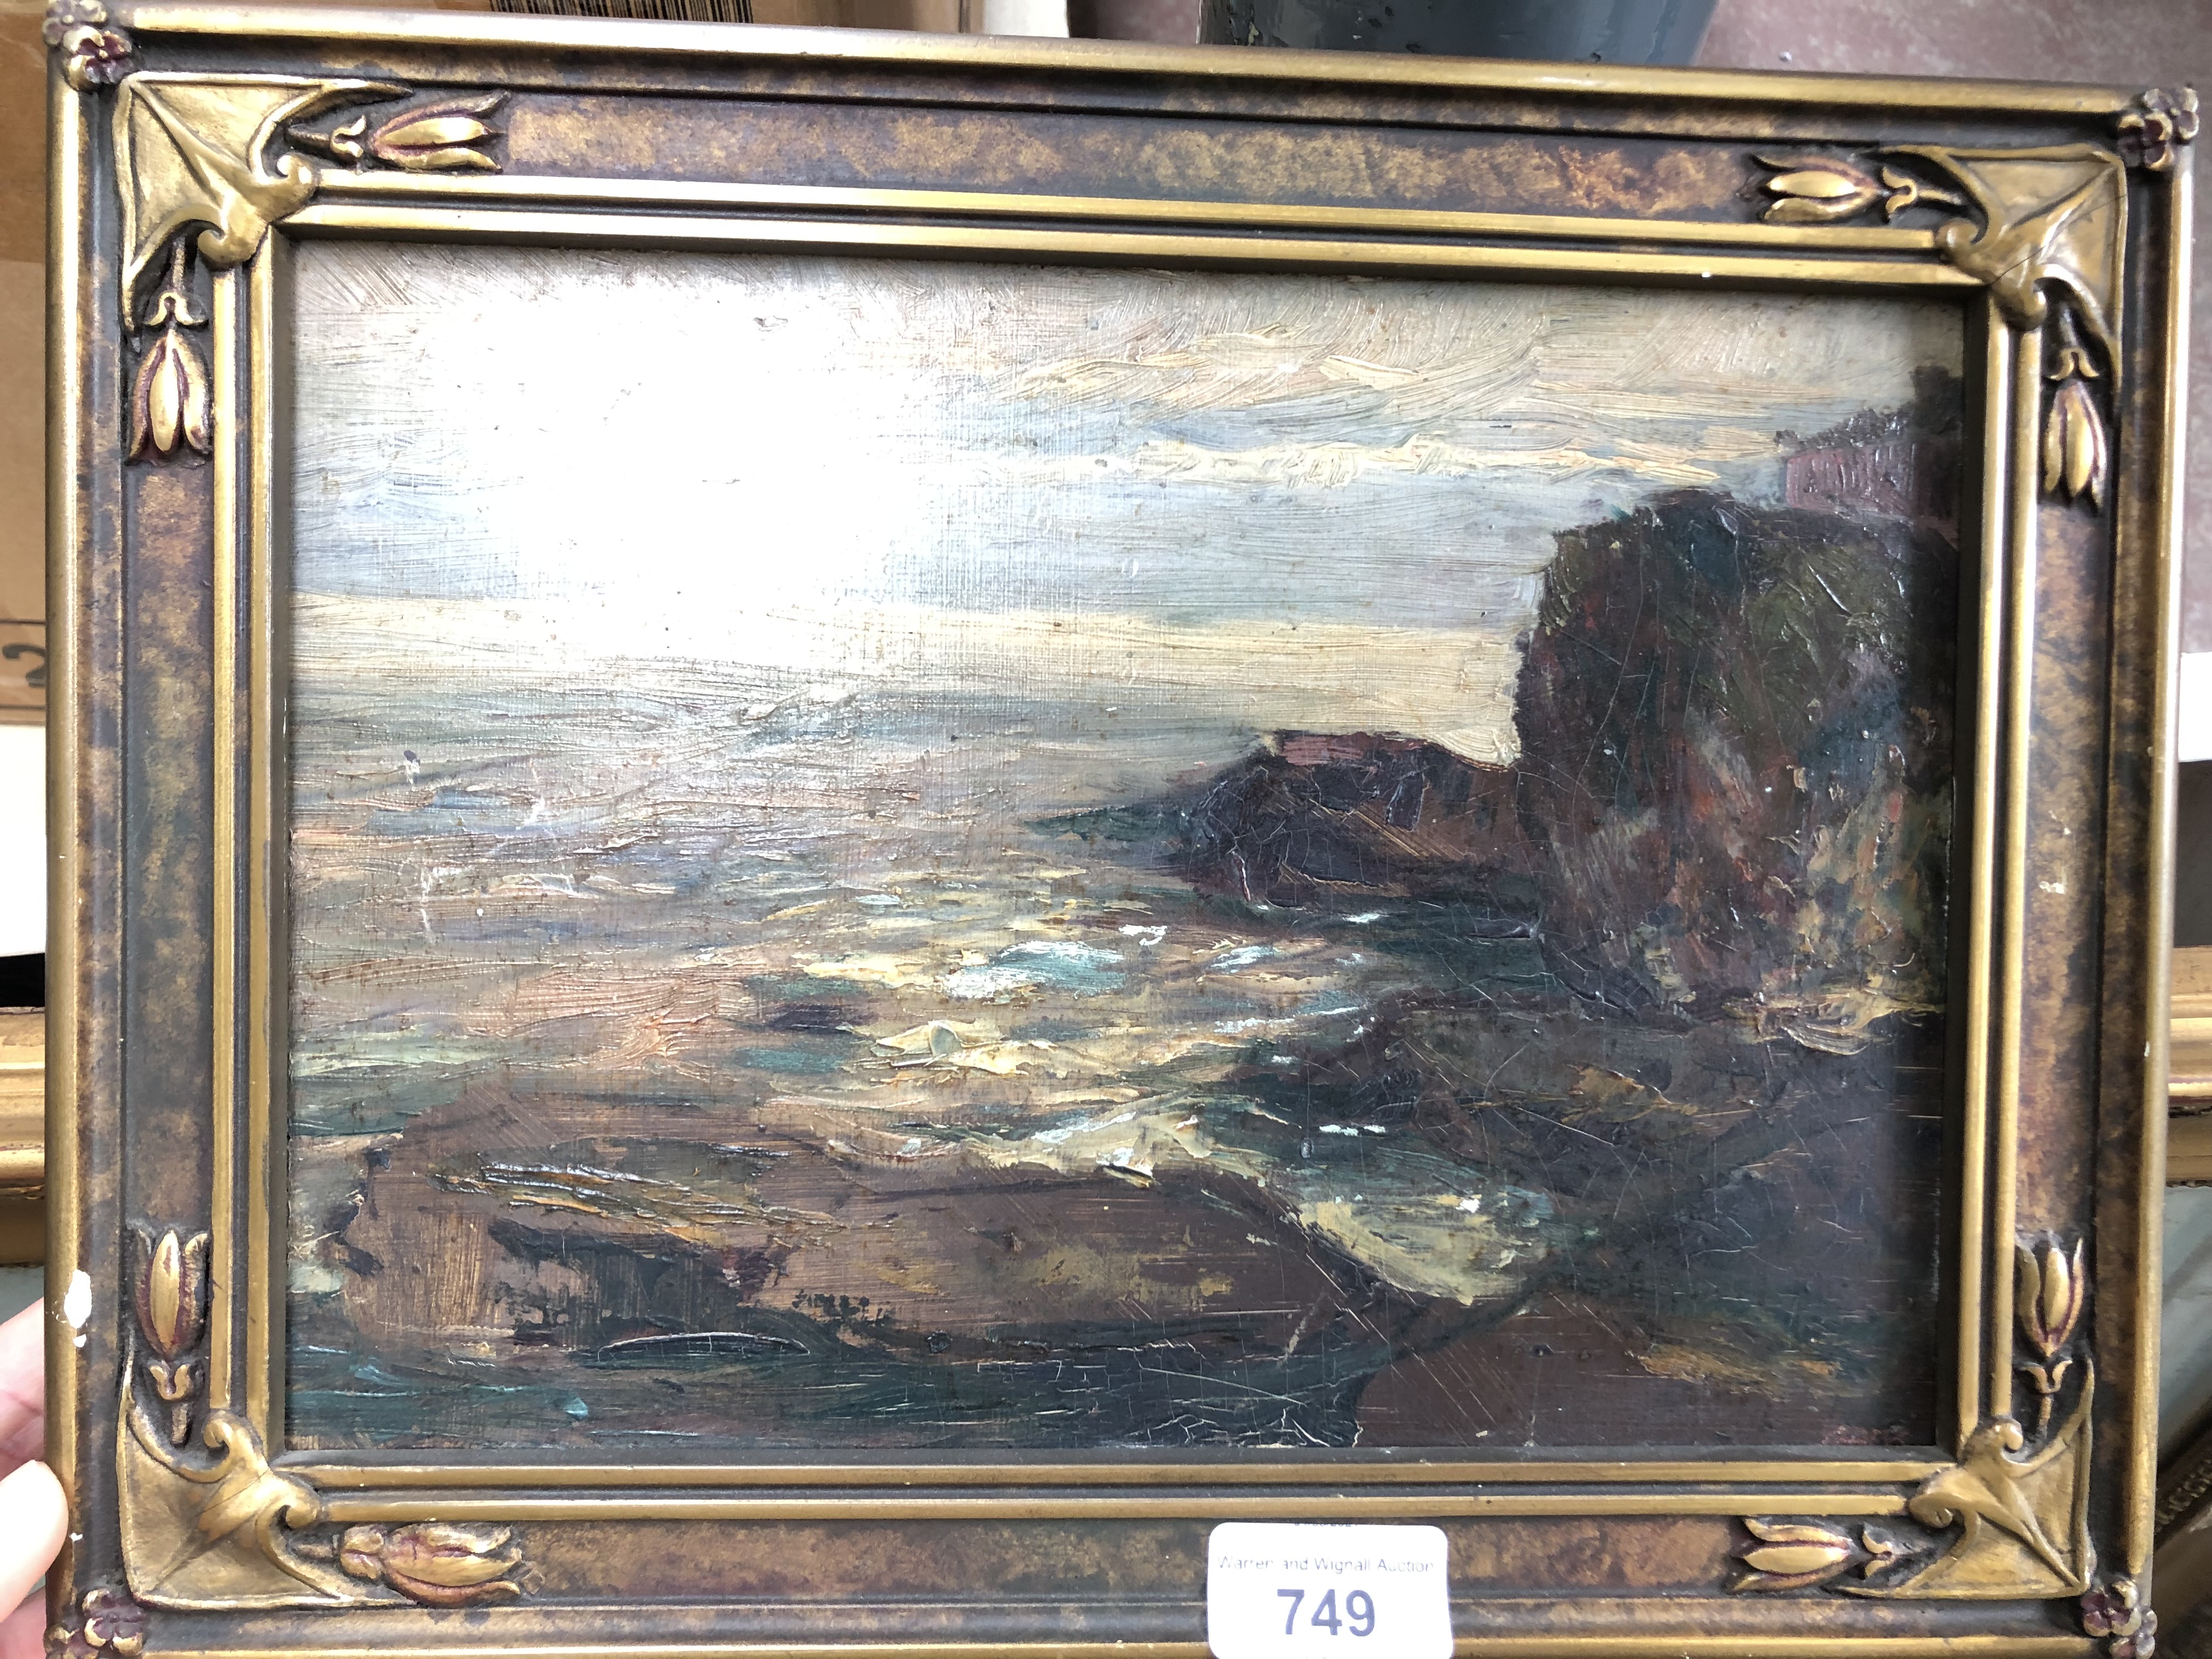 An early 20th century coastal scene oil on board, indistinctly signed lower right, possibly Russian? - Image 2 of 9